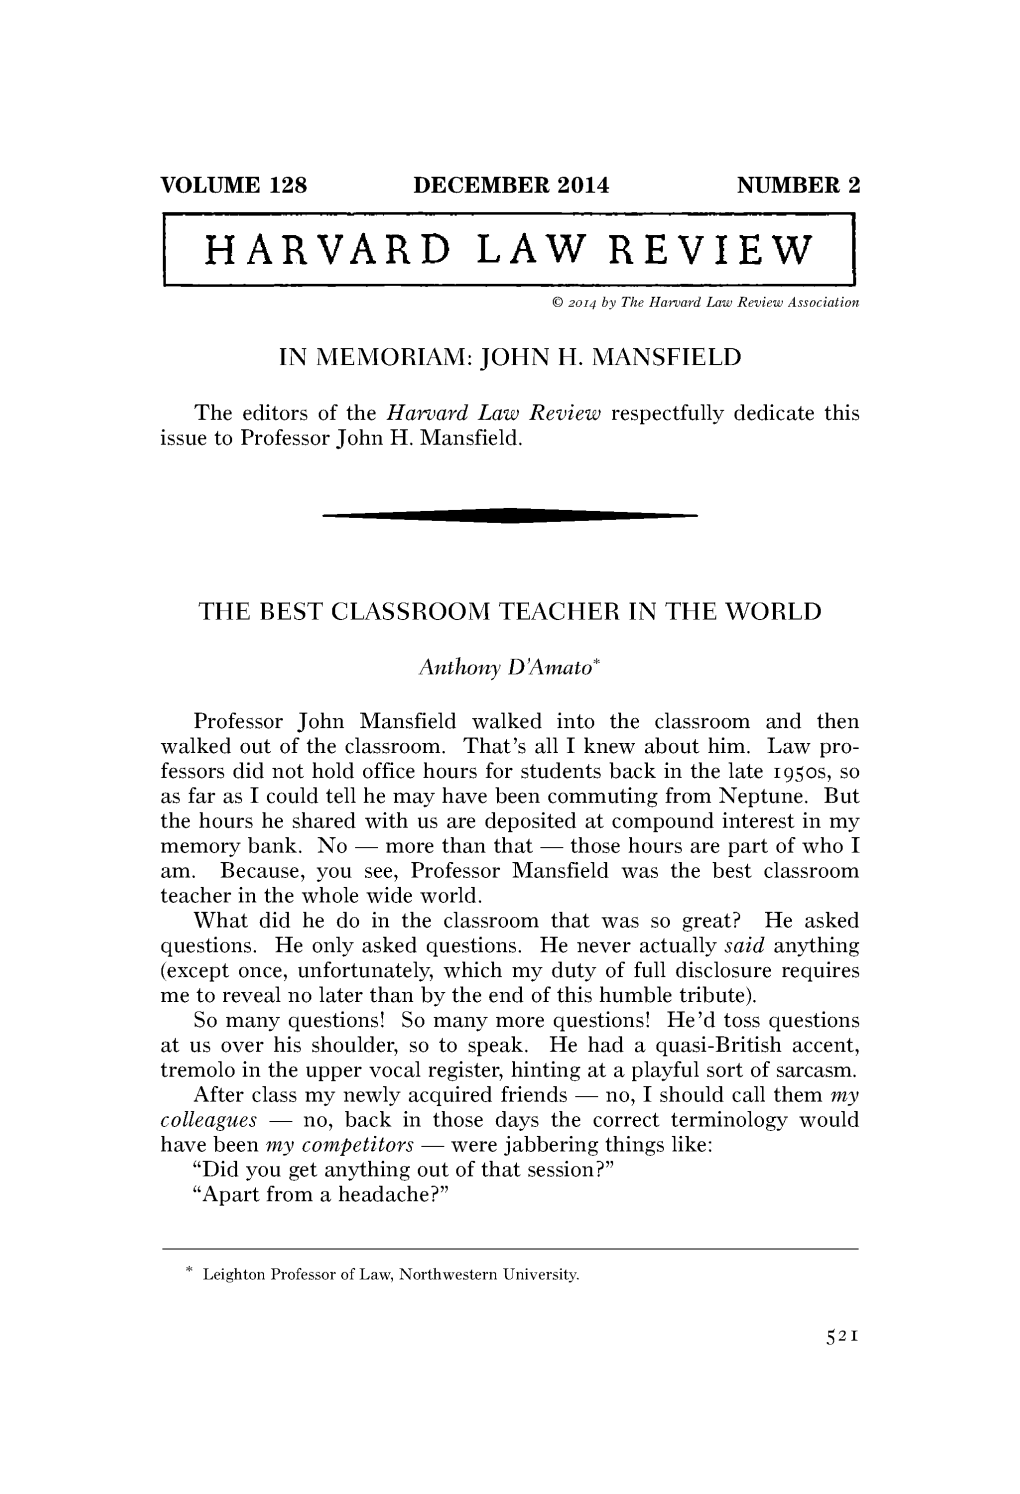 HARVARD LAW REVIEW I © 2014 by the Harvardlaw Review Association